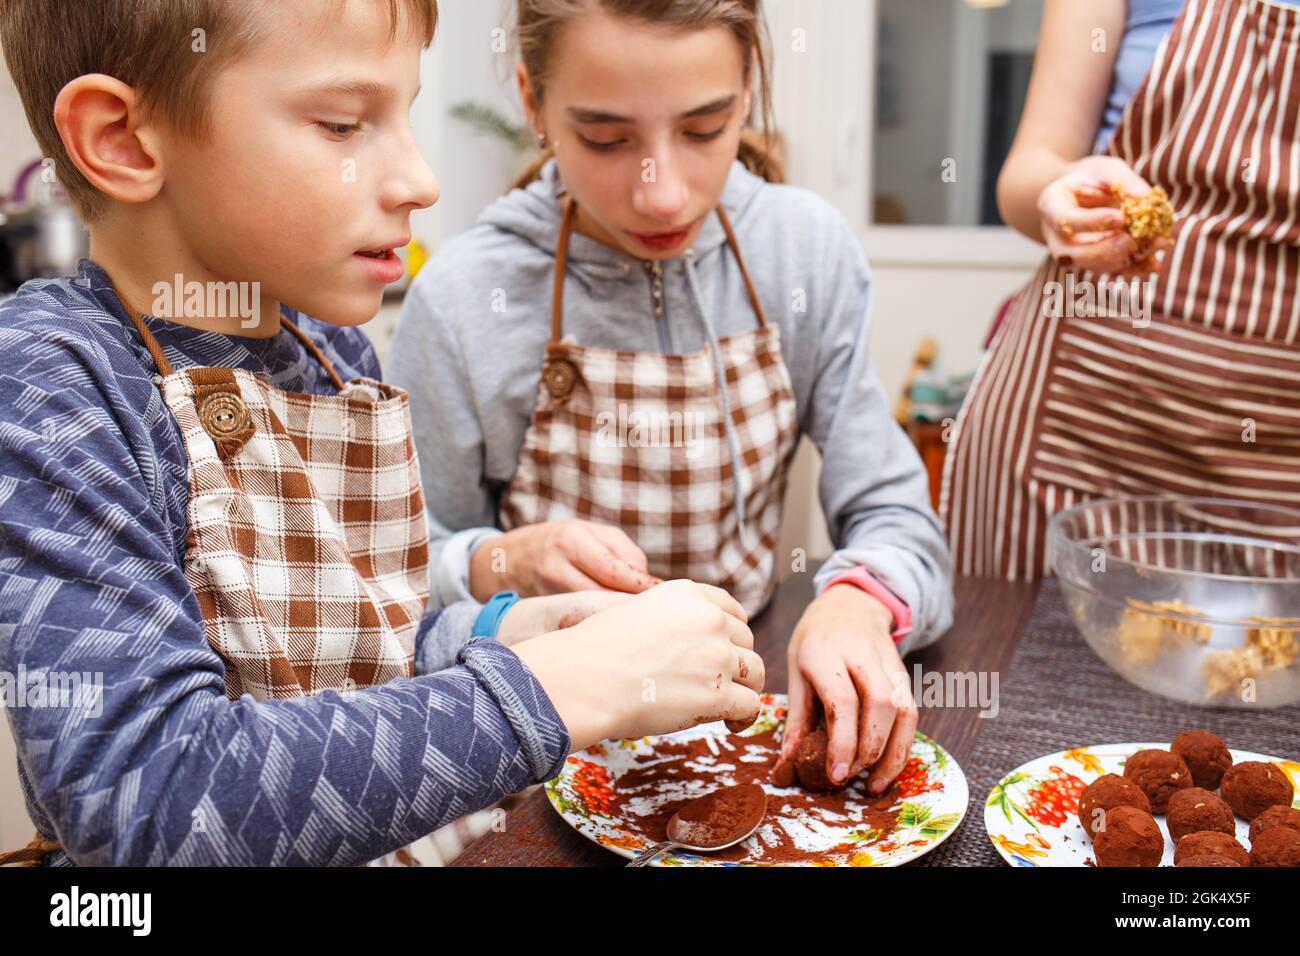 Family cooking sweets at home kitchen. Boy and girl with their mother make healthy sweets with fruits and cocoa. Stock Photo